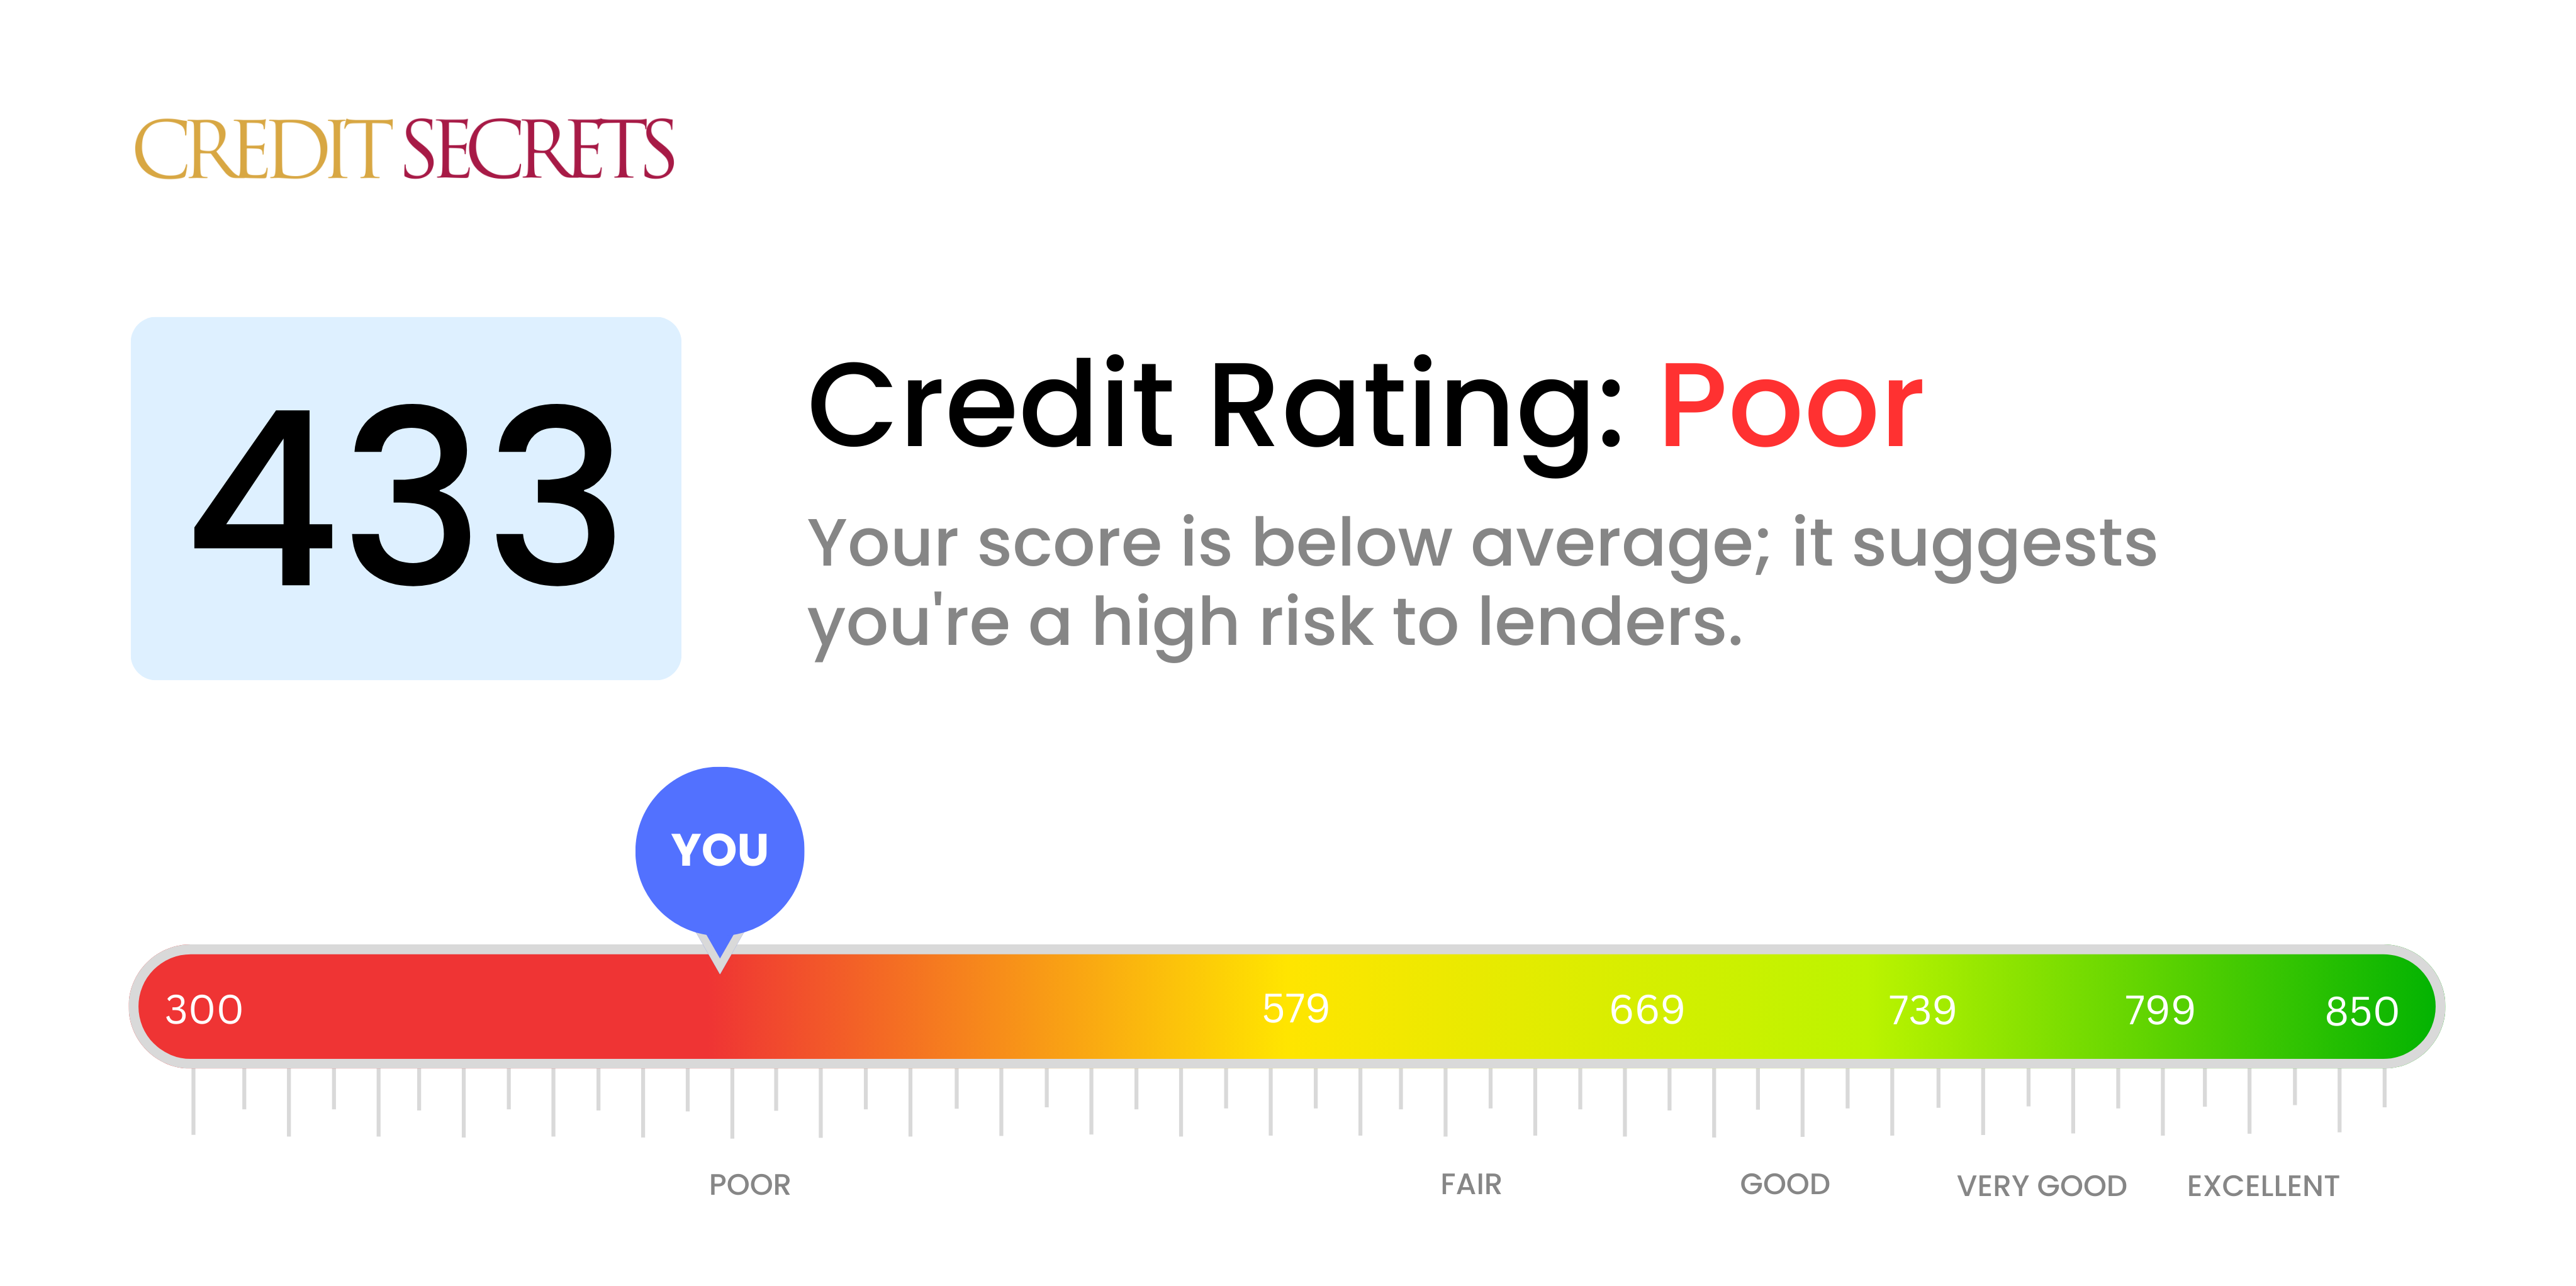 Is 433 a good credit score?